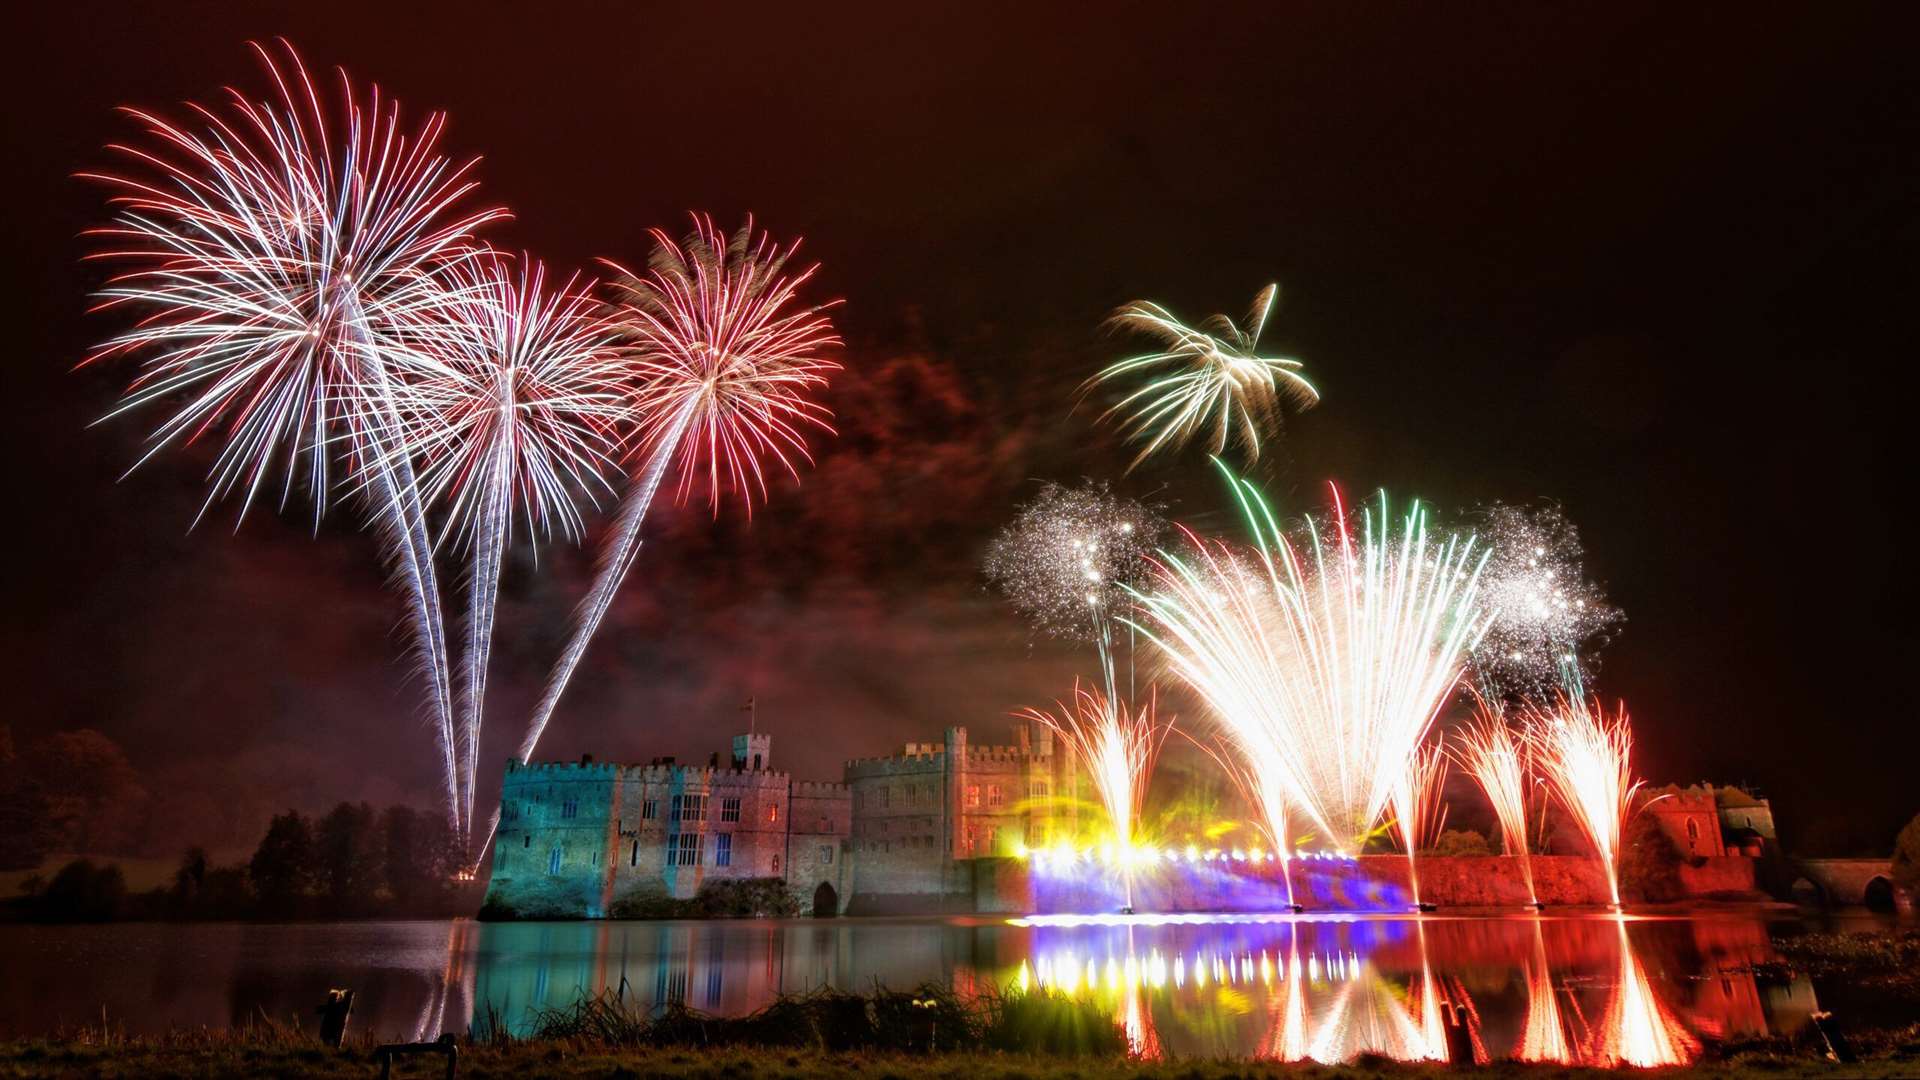 Fireworks will light up the historic grounds at Leeds Castle. Picture: Scott Nicol